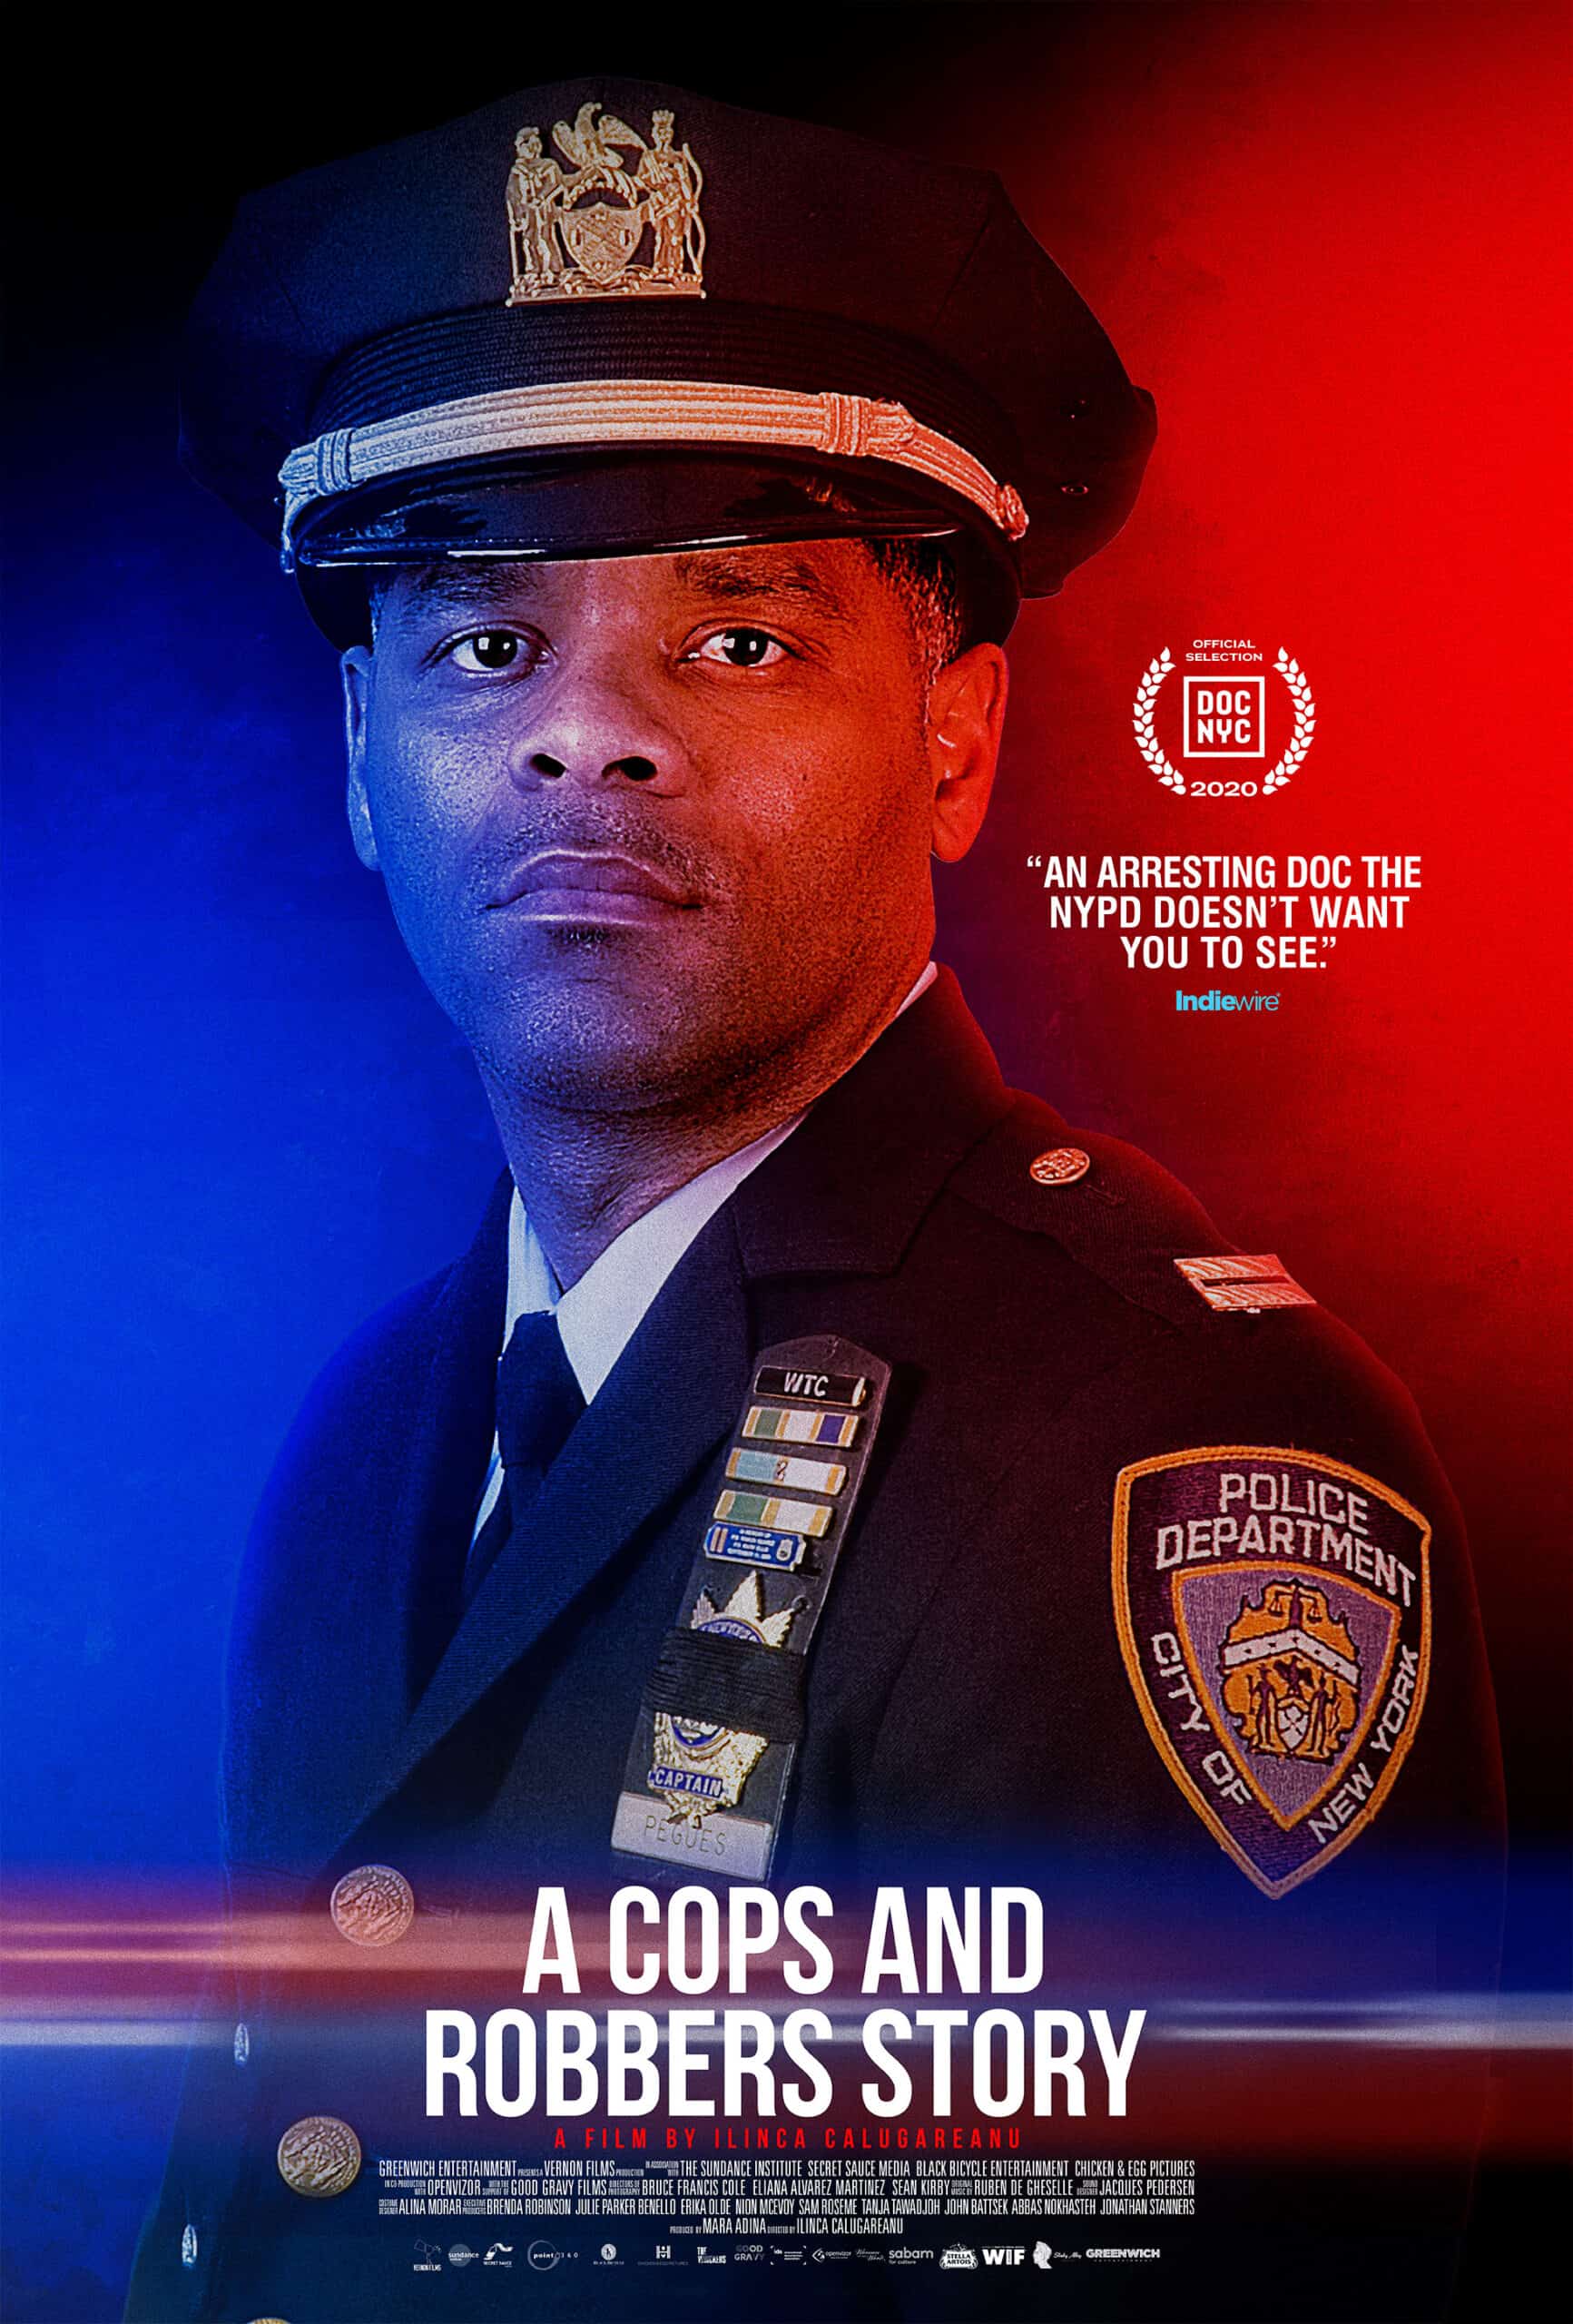 Poster for the film A COPS AND ROBBERS STORY